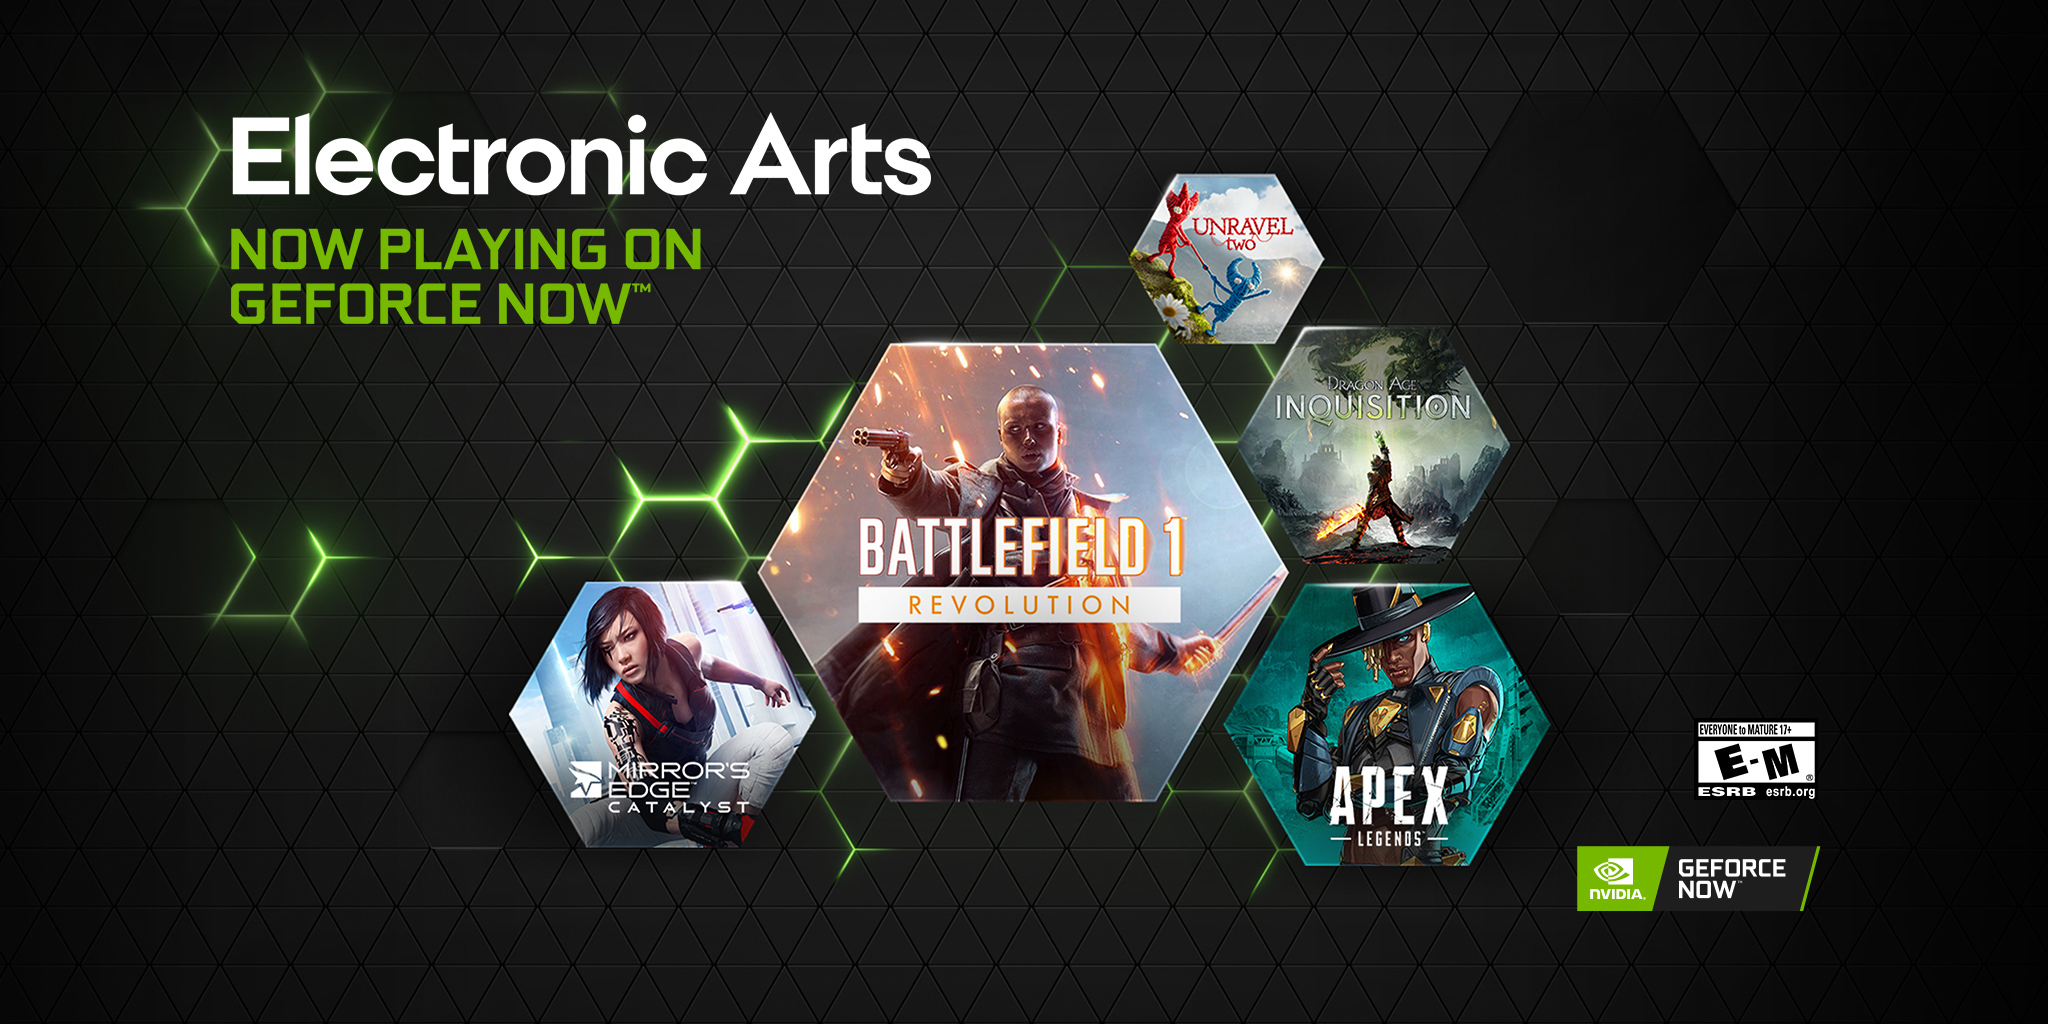 GeForce Now expands support for EA games - 9to5Google